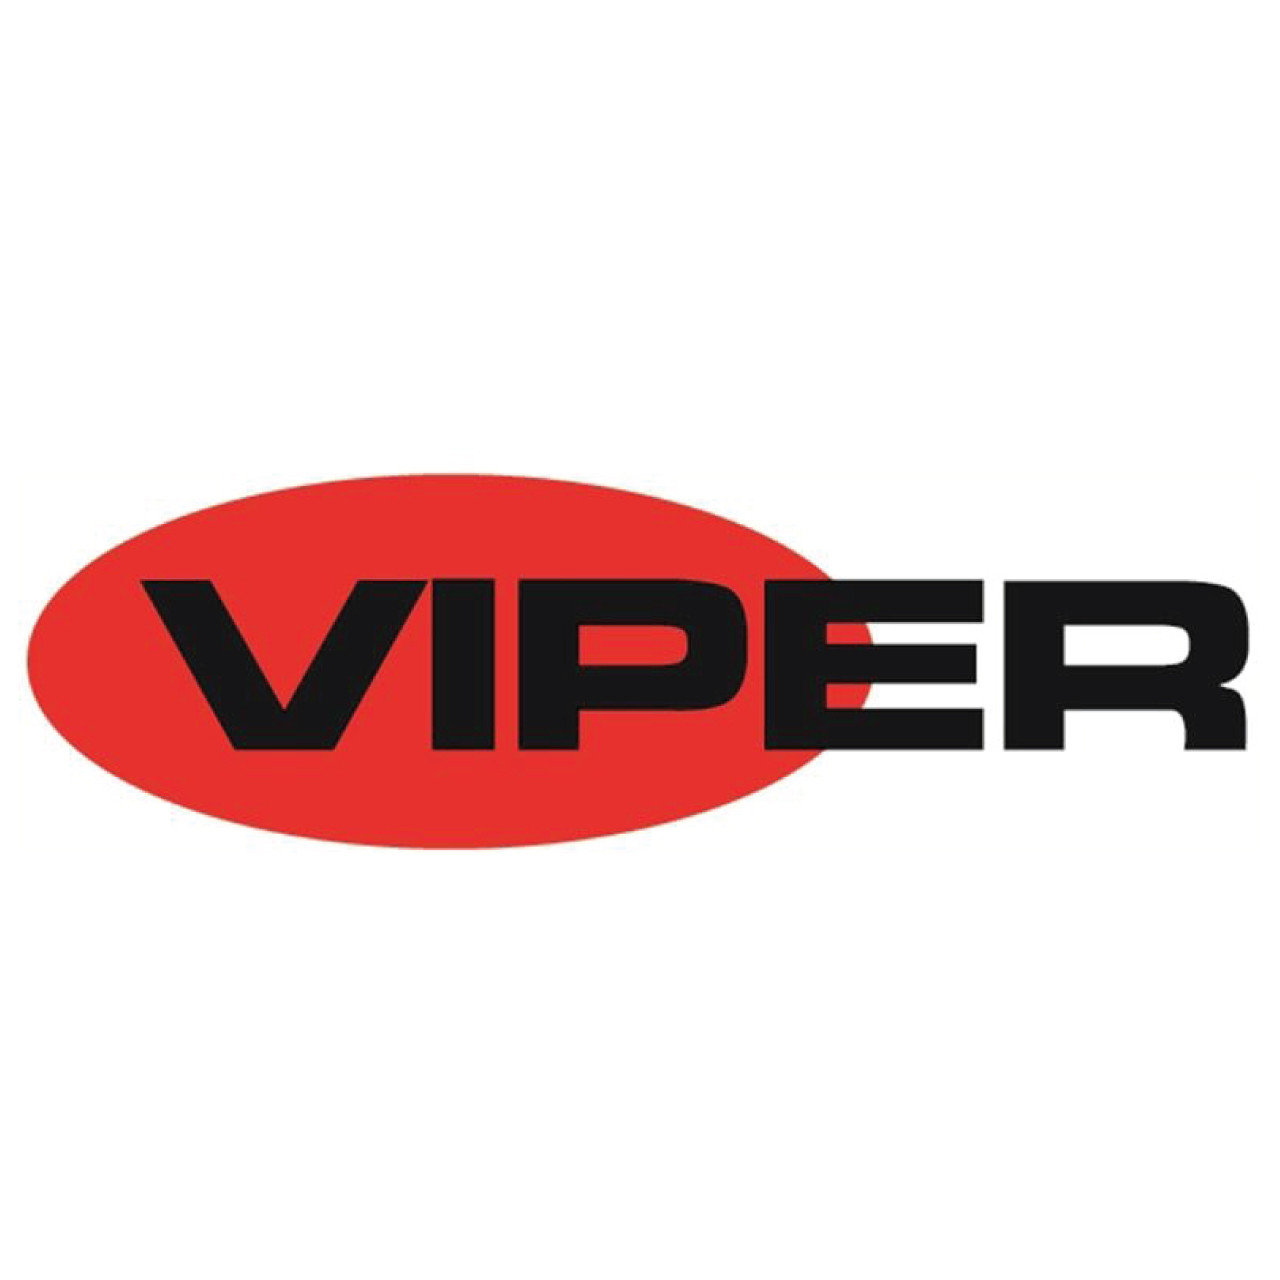 VIPER EQUIPMENT PART # 4072200820 FLOOR CLEANING KIT D40 PICTURE